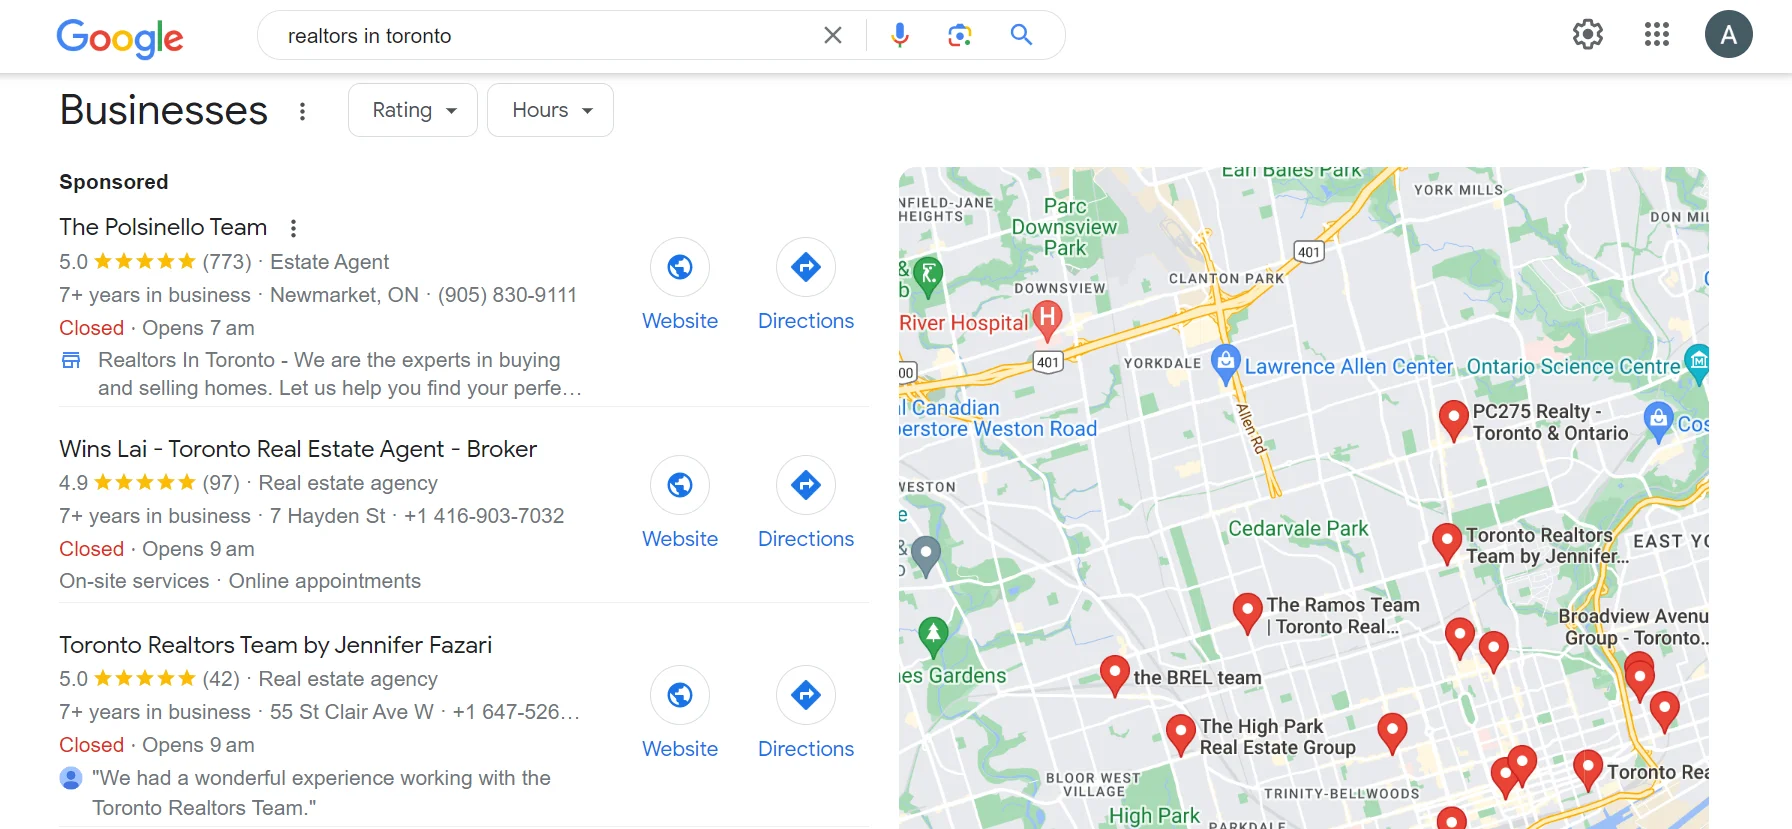 Search results of realtors in toronto listed on Google Business Profile